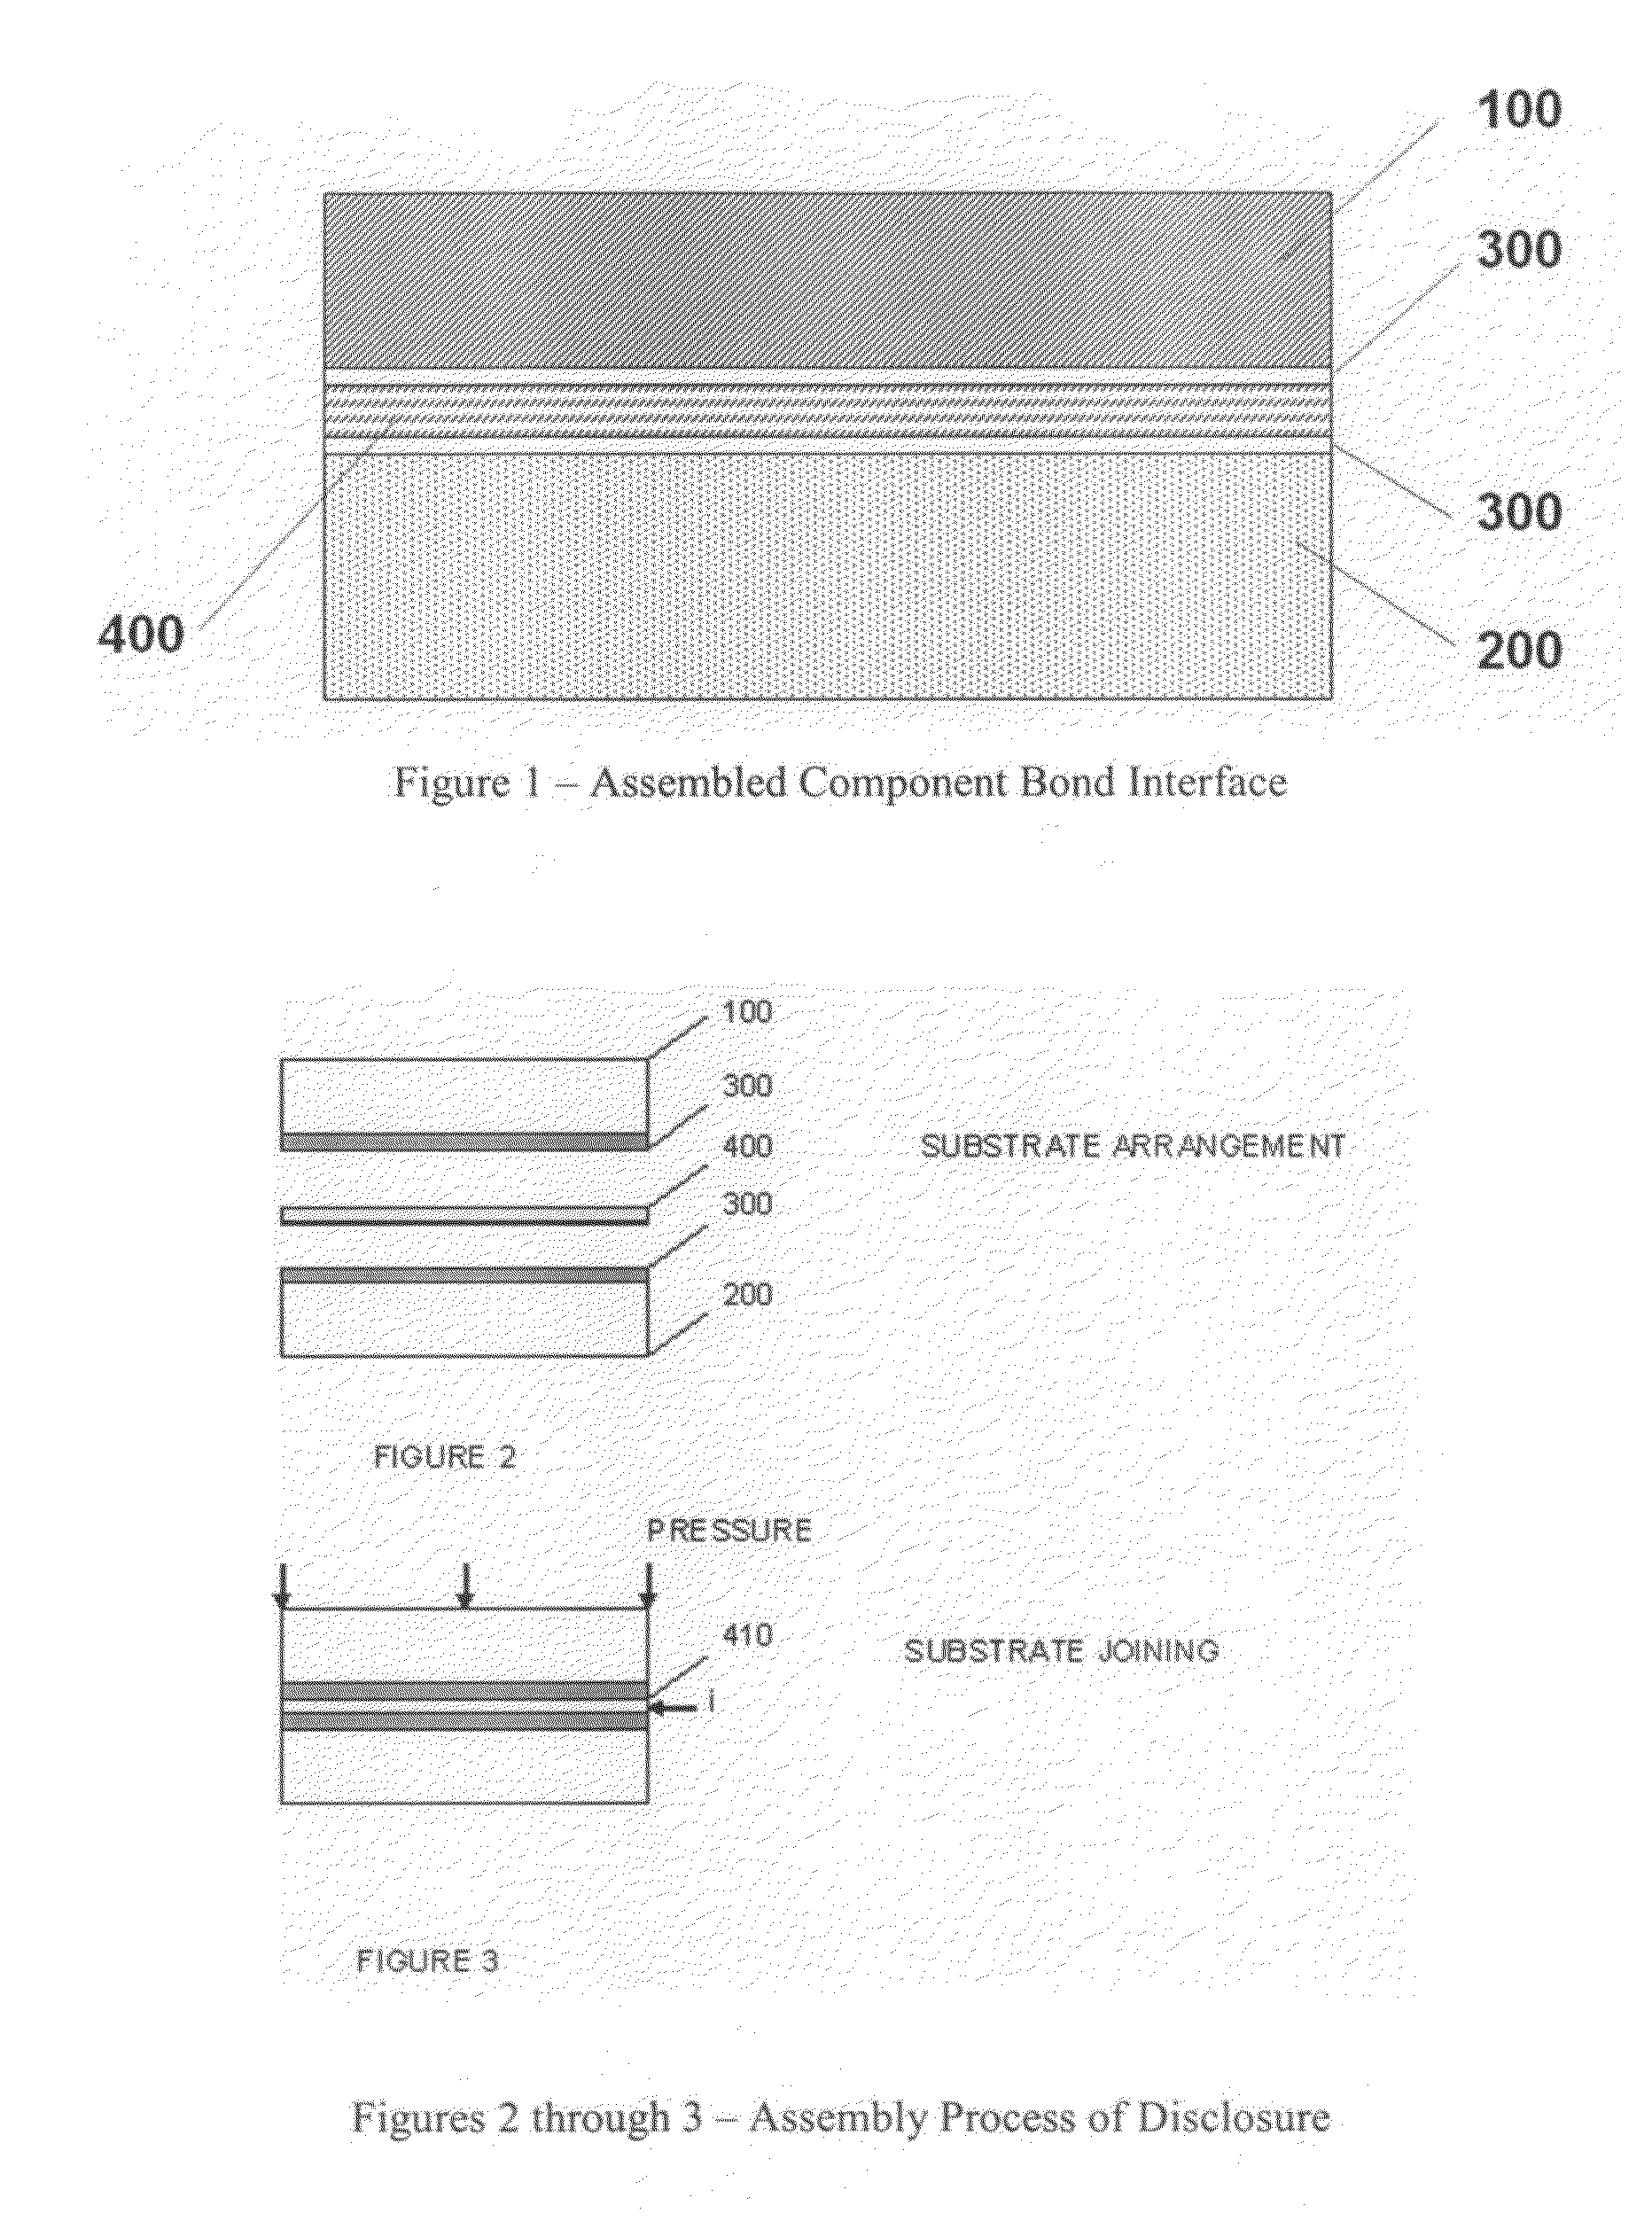 Method for creating thermal bonds while minimizing heating of parts